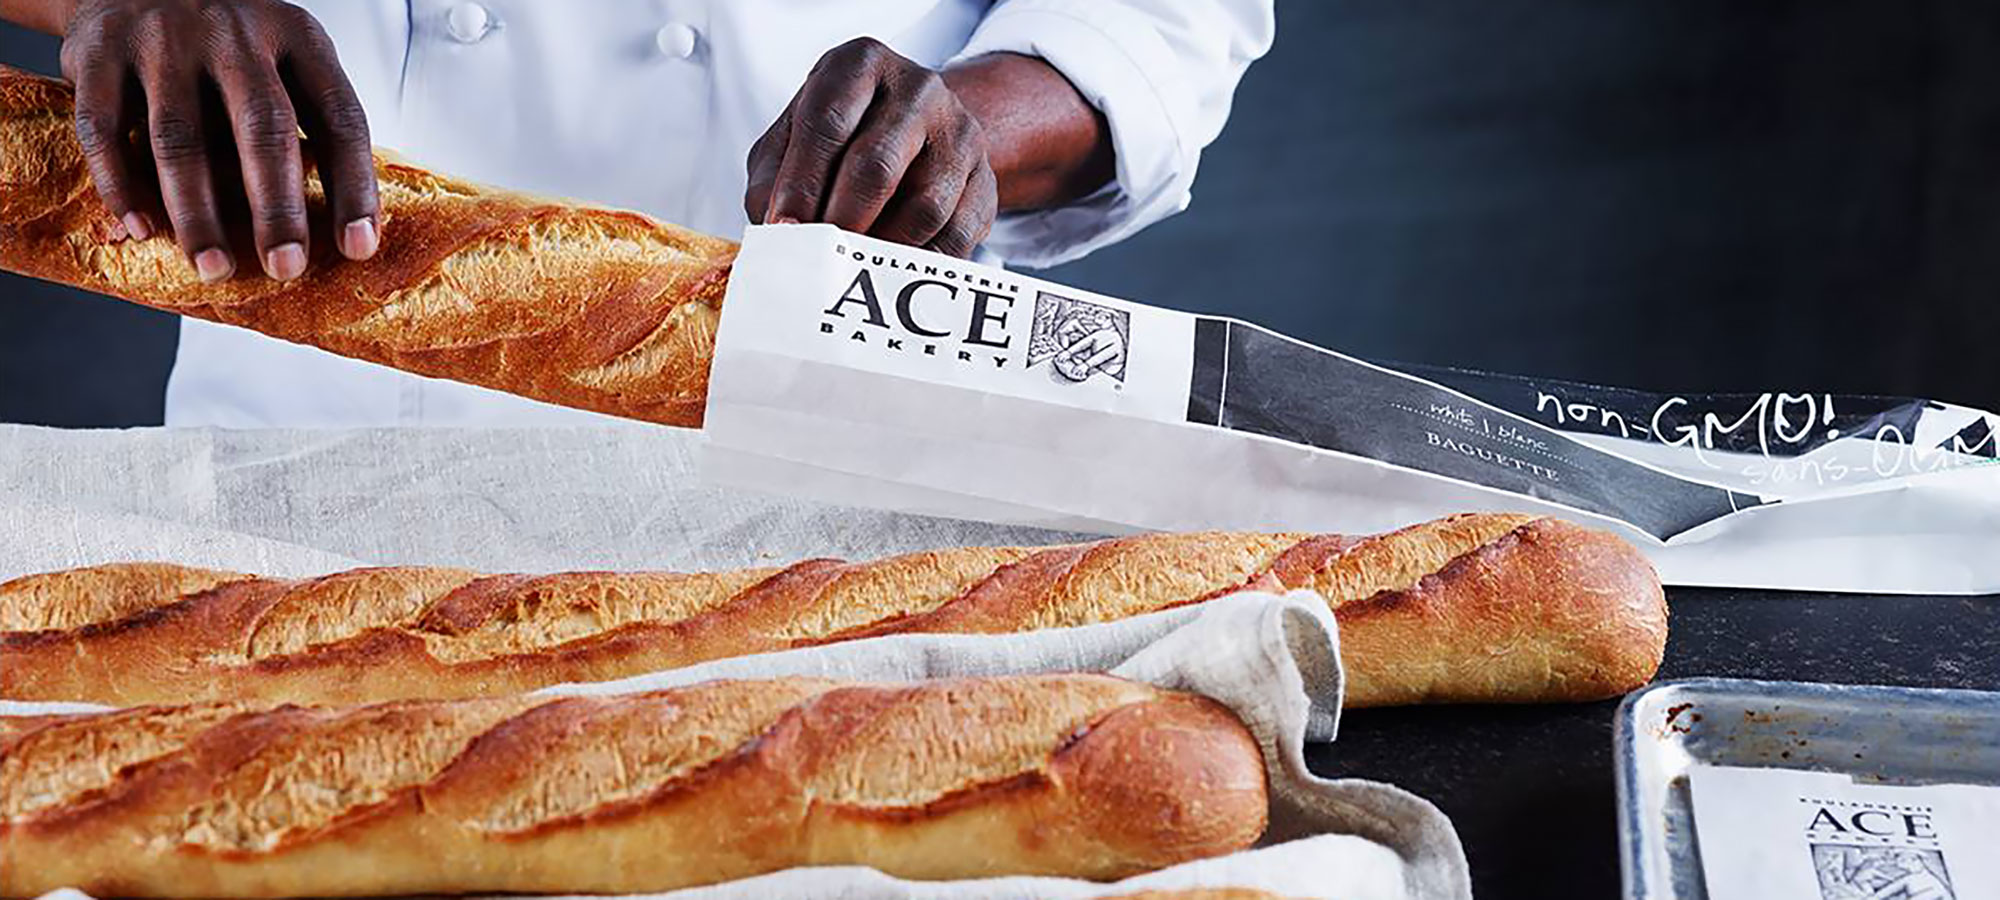 ACE Bakery white baguettes